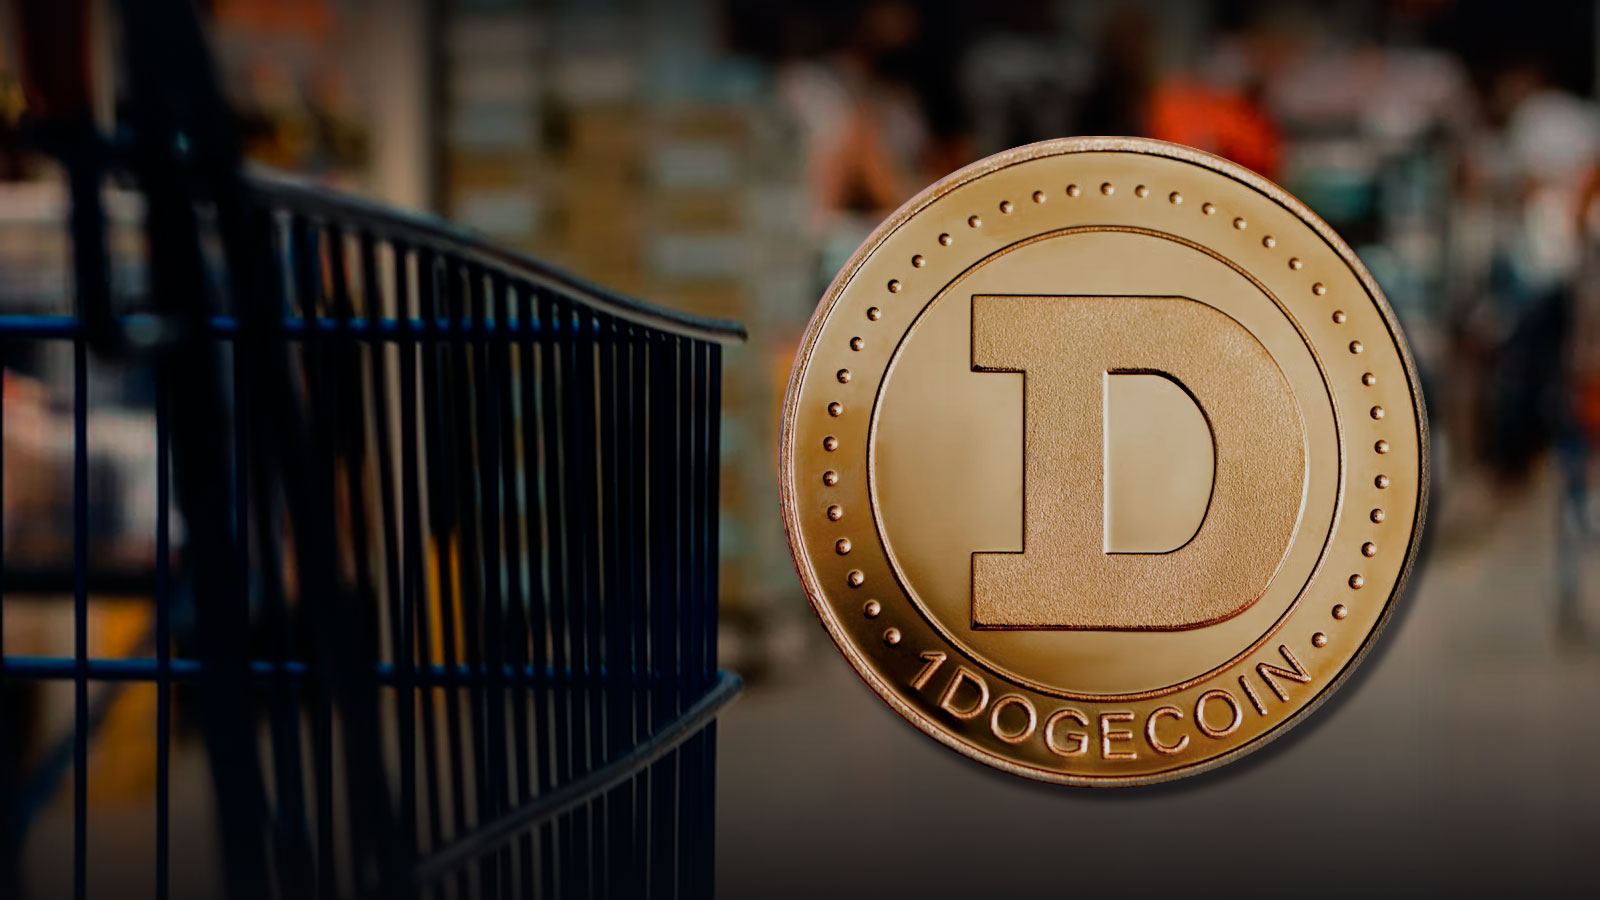 Dogecoin Comes to Grocery Stores in US